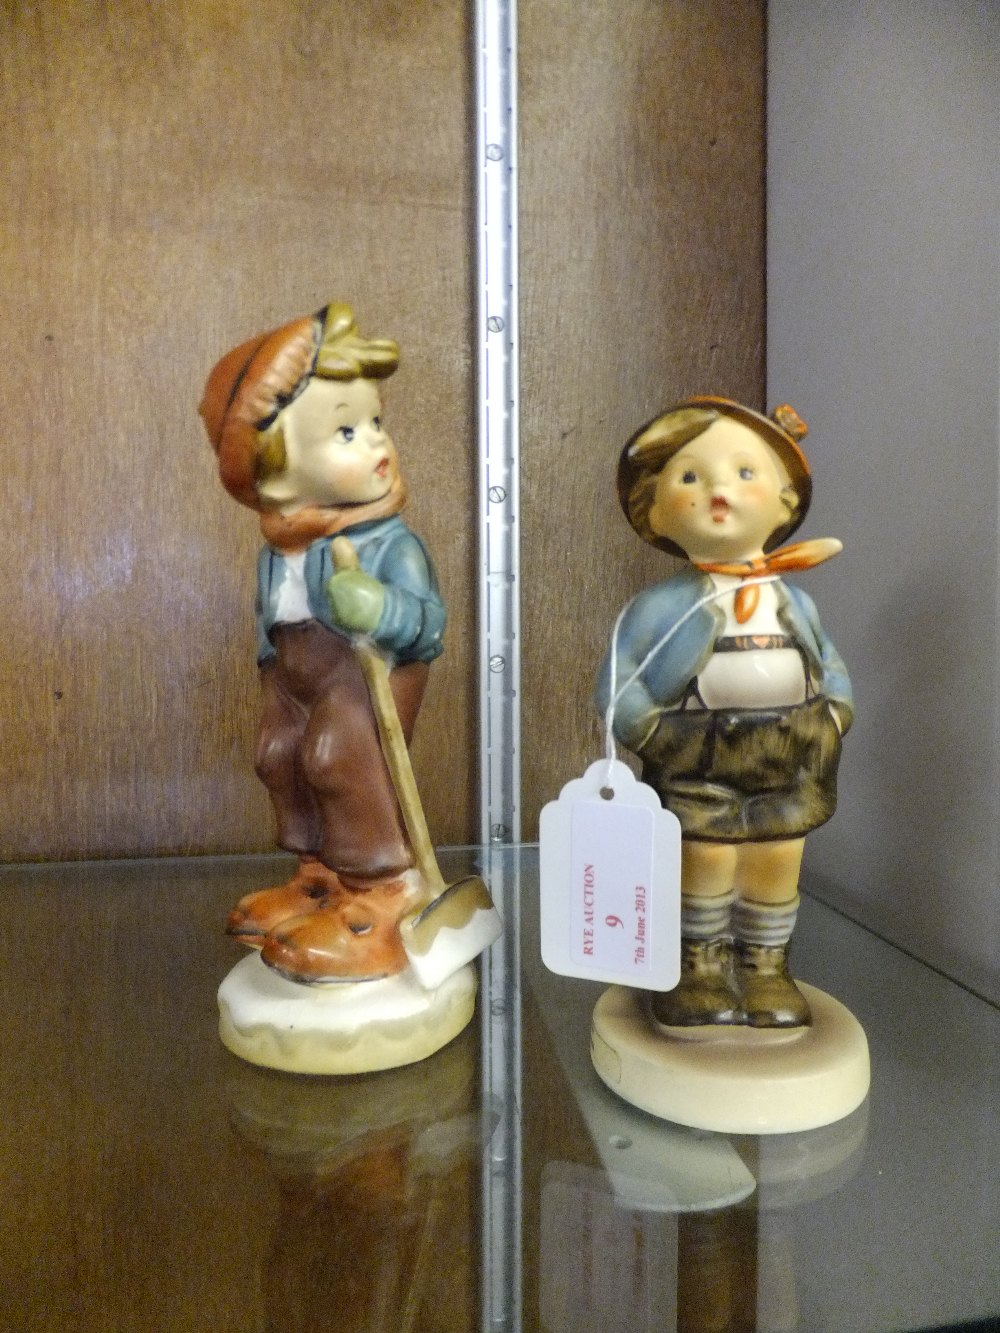 A Goebel figure the "The Brother " and another